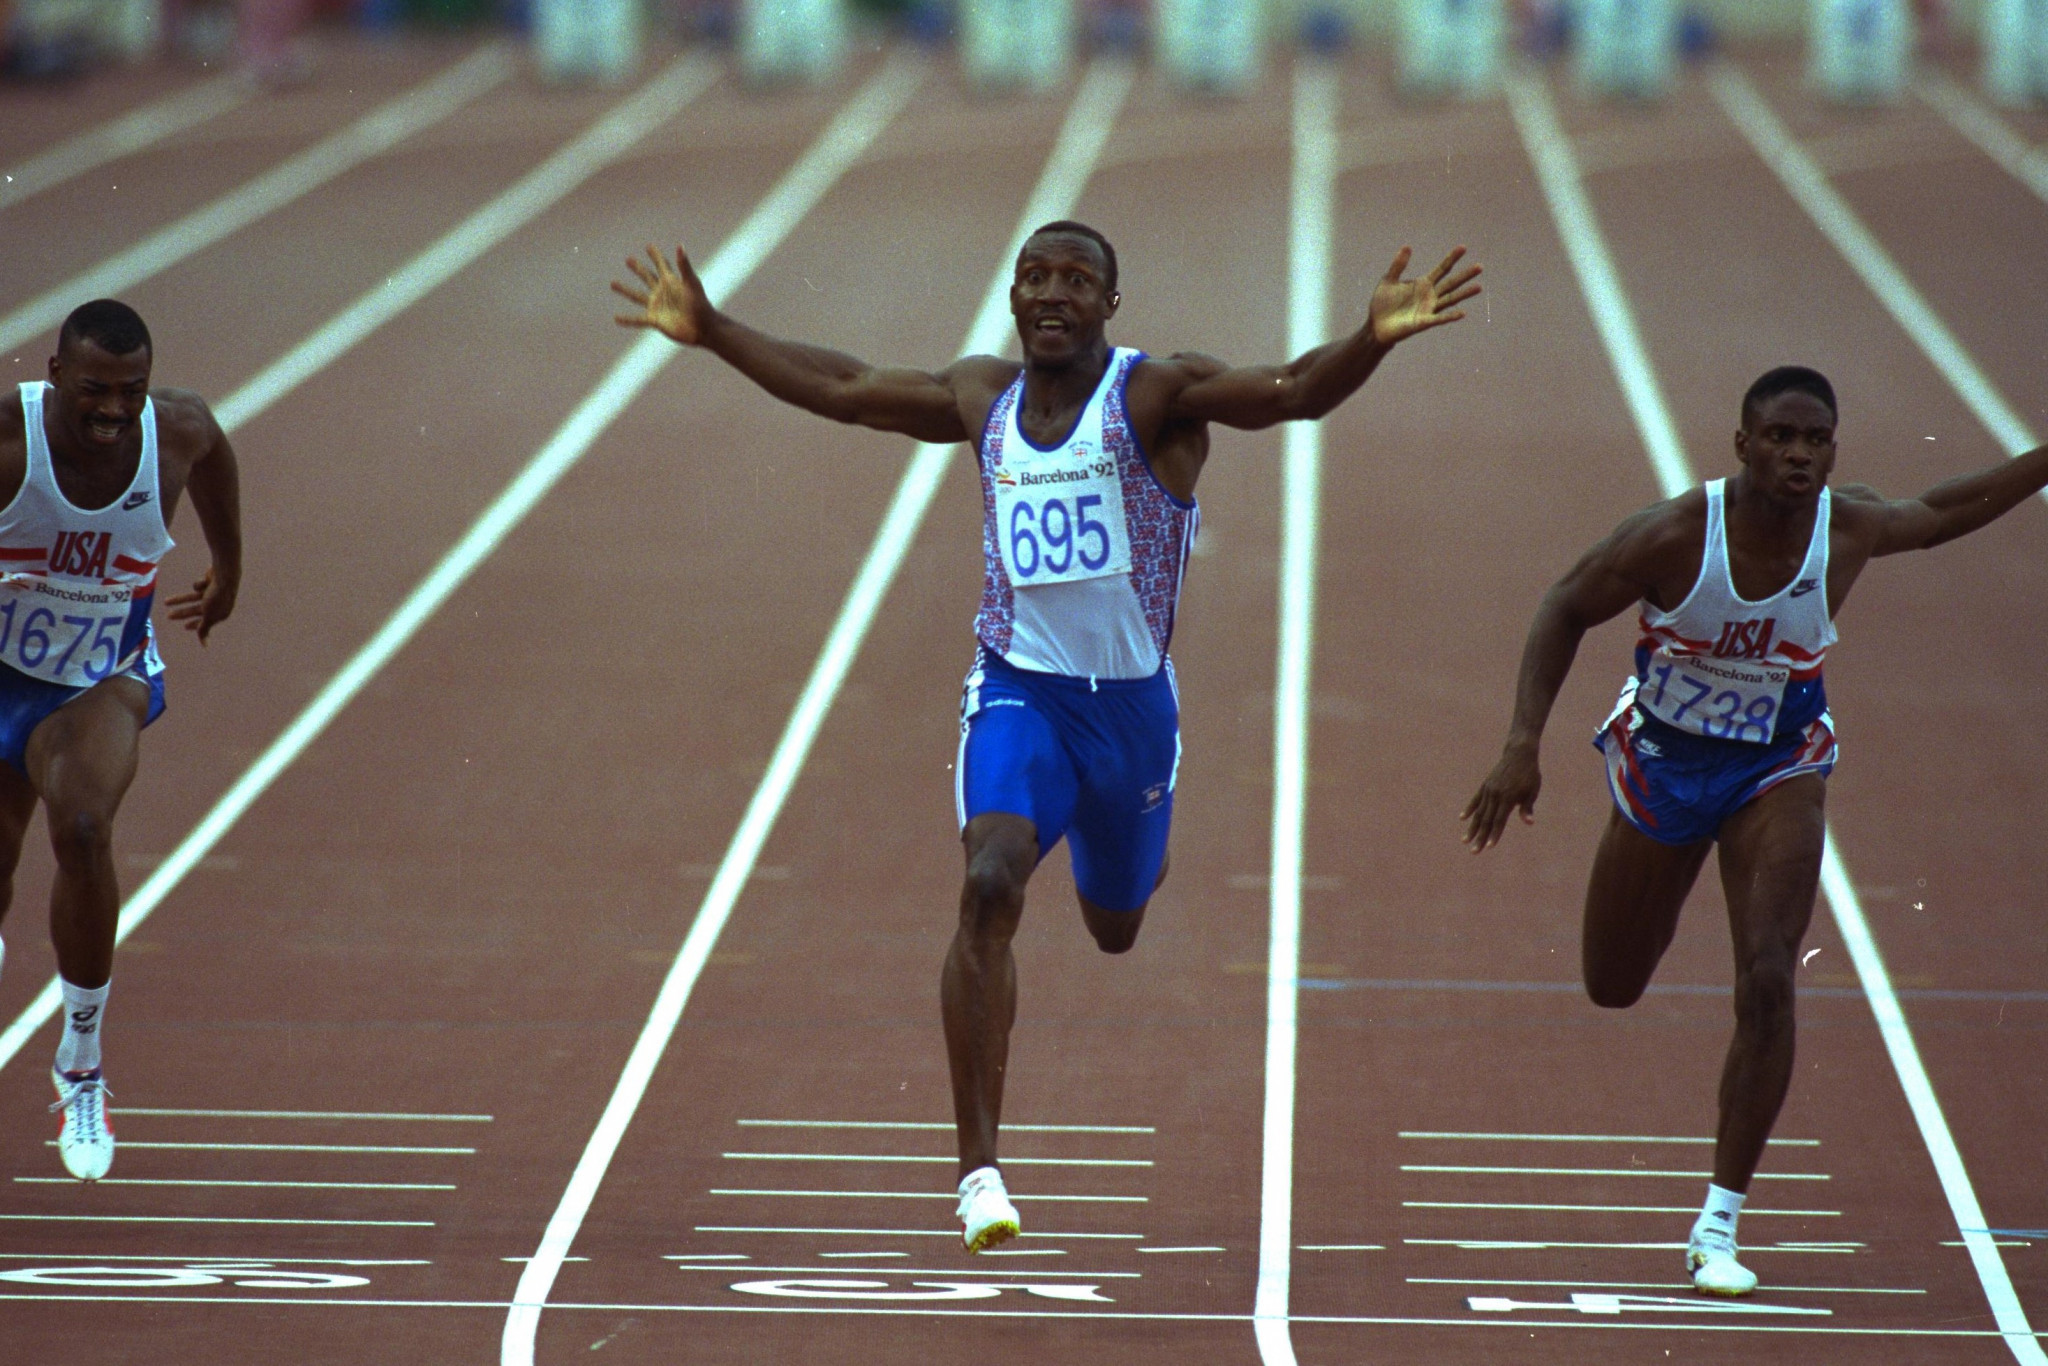 Linford Christie escaped his own drugs ban at Seoul 1988 and came back four years later to win the Olympic 100m - before later testing positive again and suspended for two years ©Getty Images